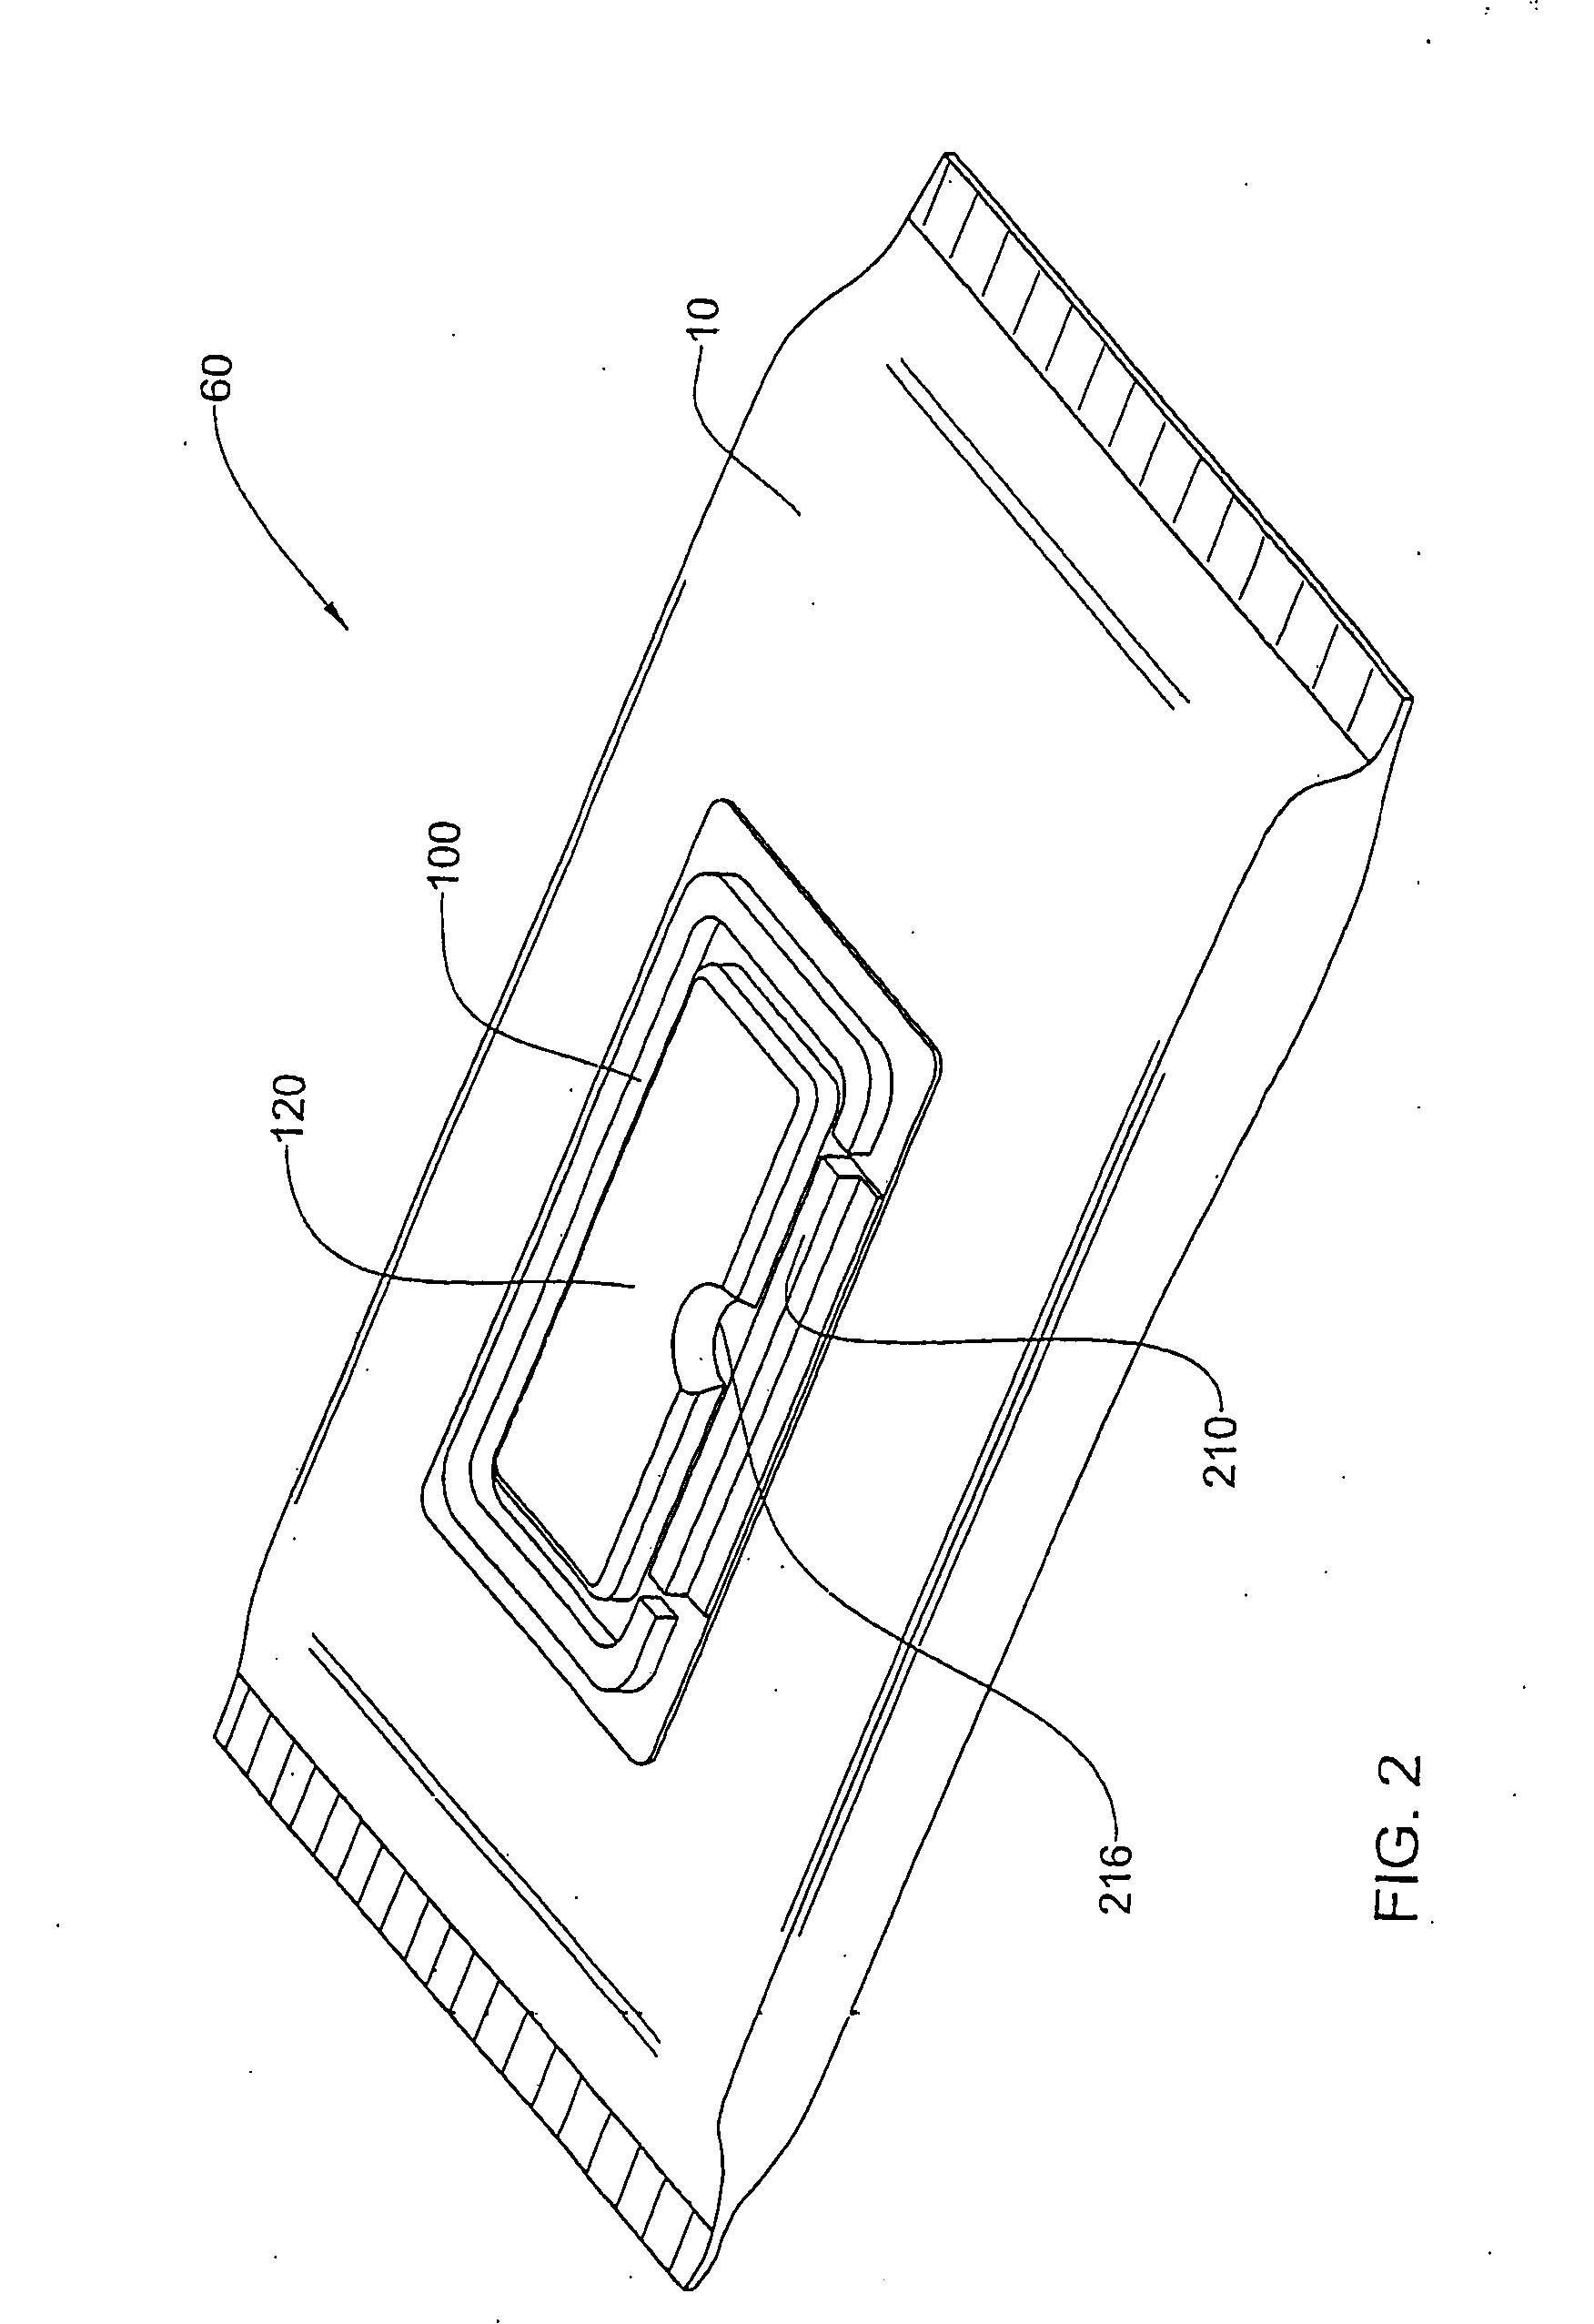 Closure unit, mold for producing same, and dispenser-container incorporating a closure unit